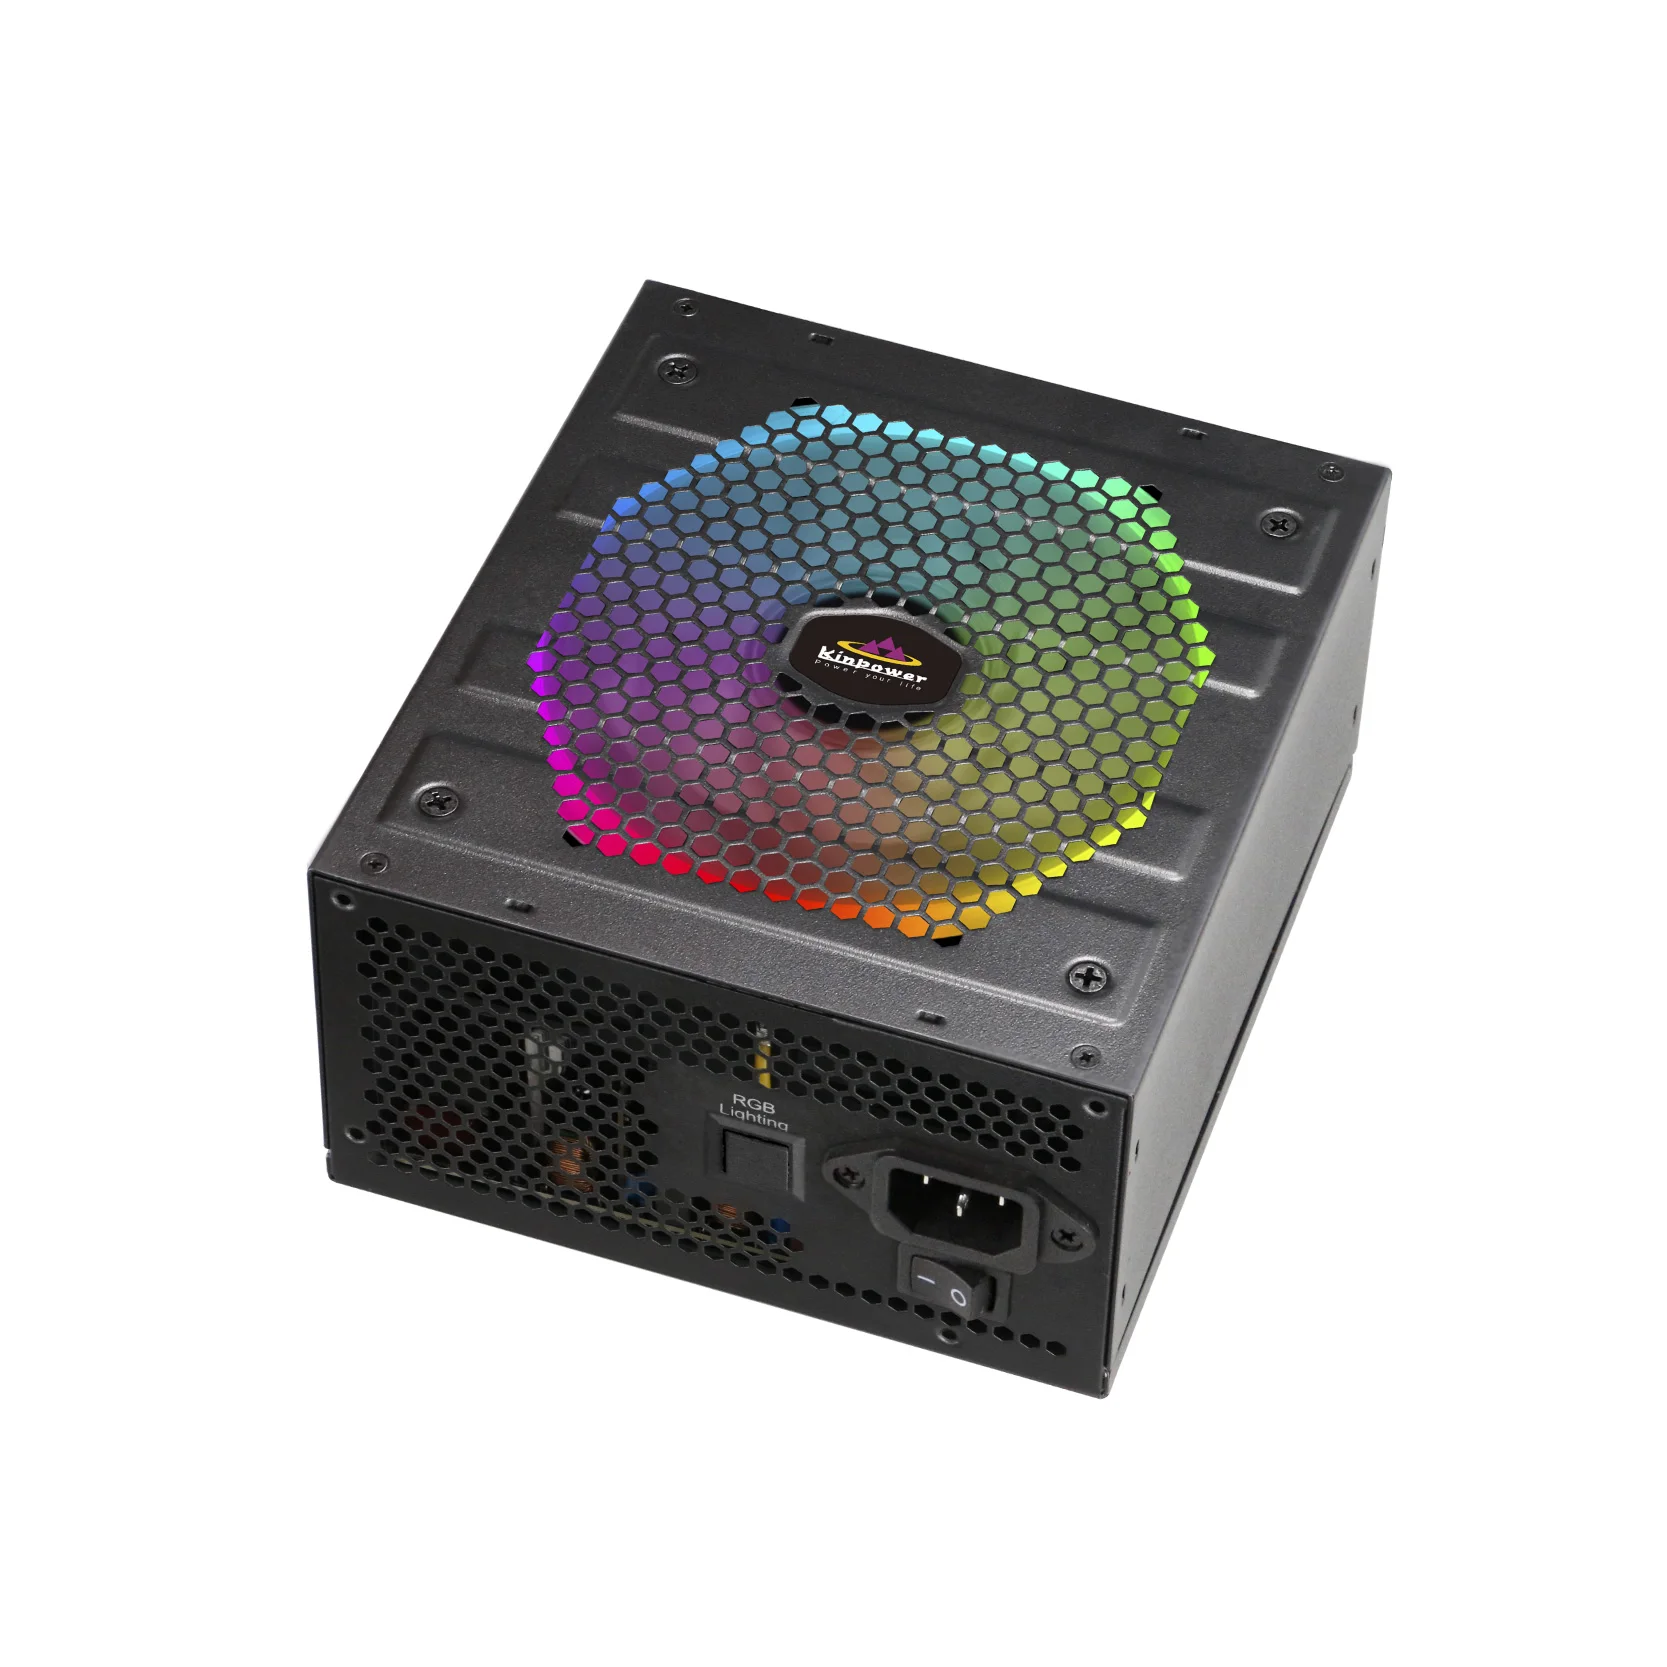 Wholesale computer power supply 1000W Full Modular Gaming Power Supplies 80 Plus PC Accessories